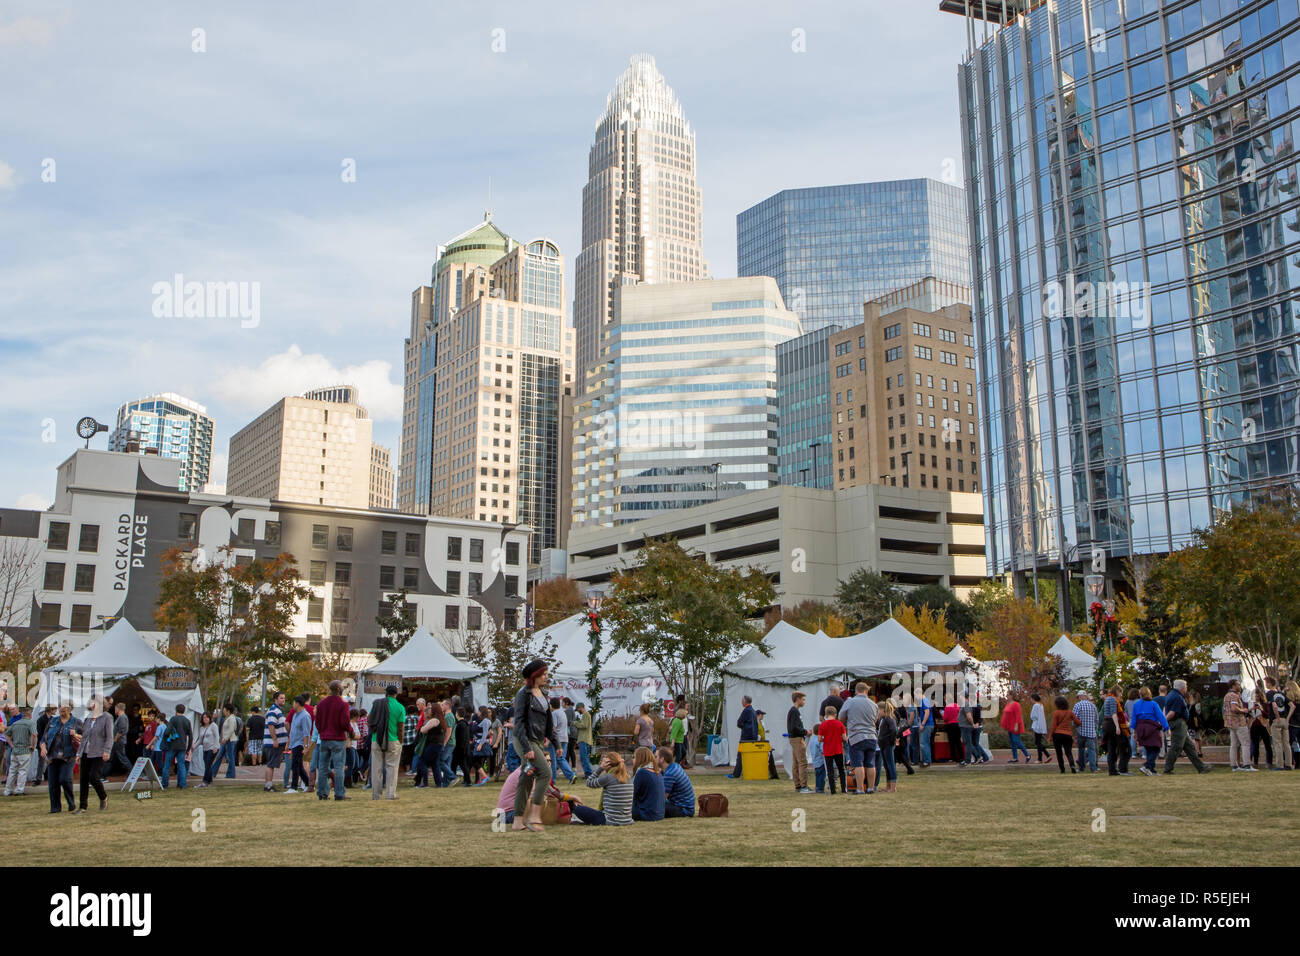 CHARLOTTE, NC - November 25, 2016:  People gather to enjoy a warn day in Romare Bearden Park in Uptown Charlotte, North Carolina. Stock Photo